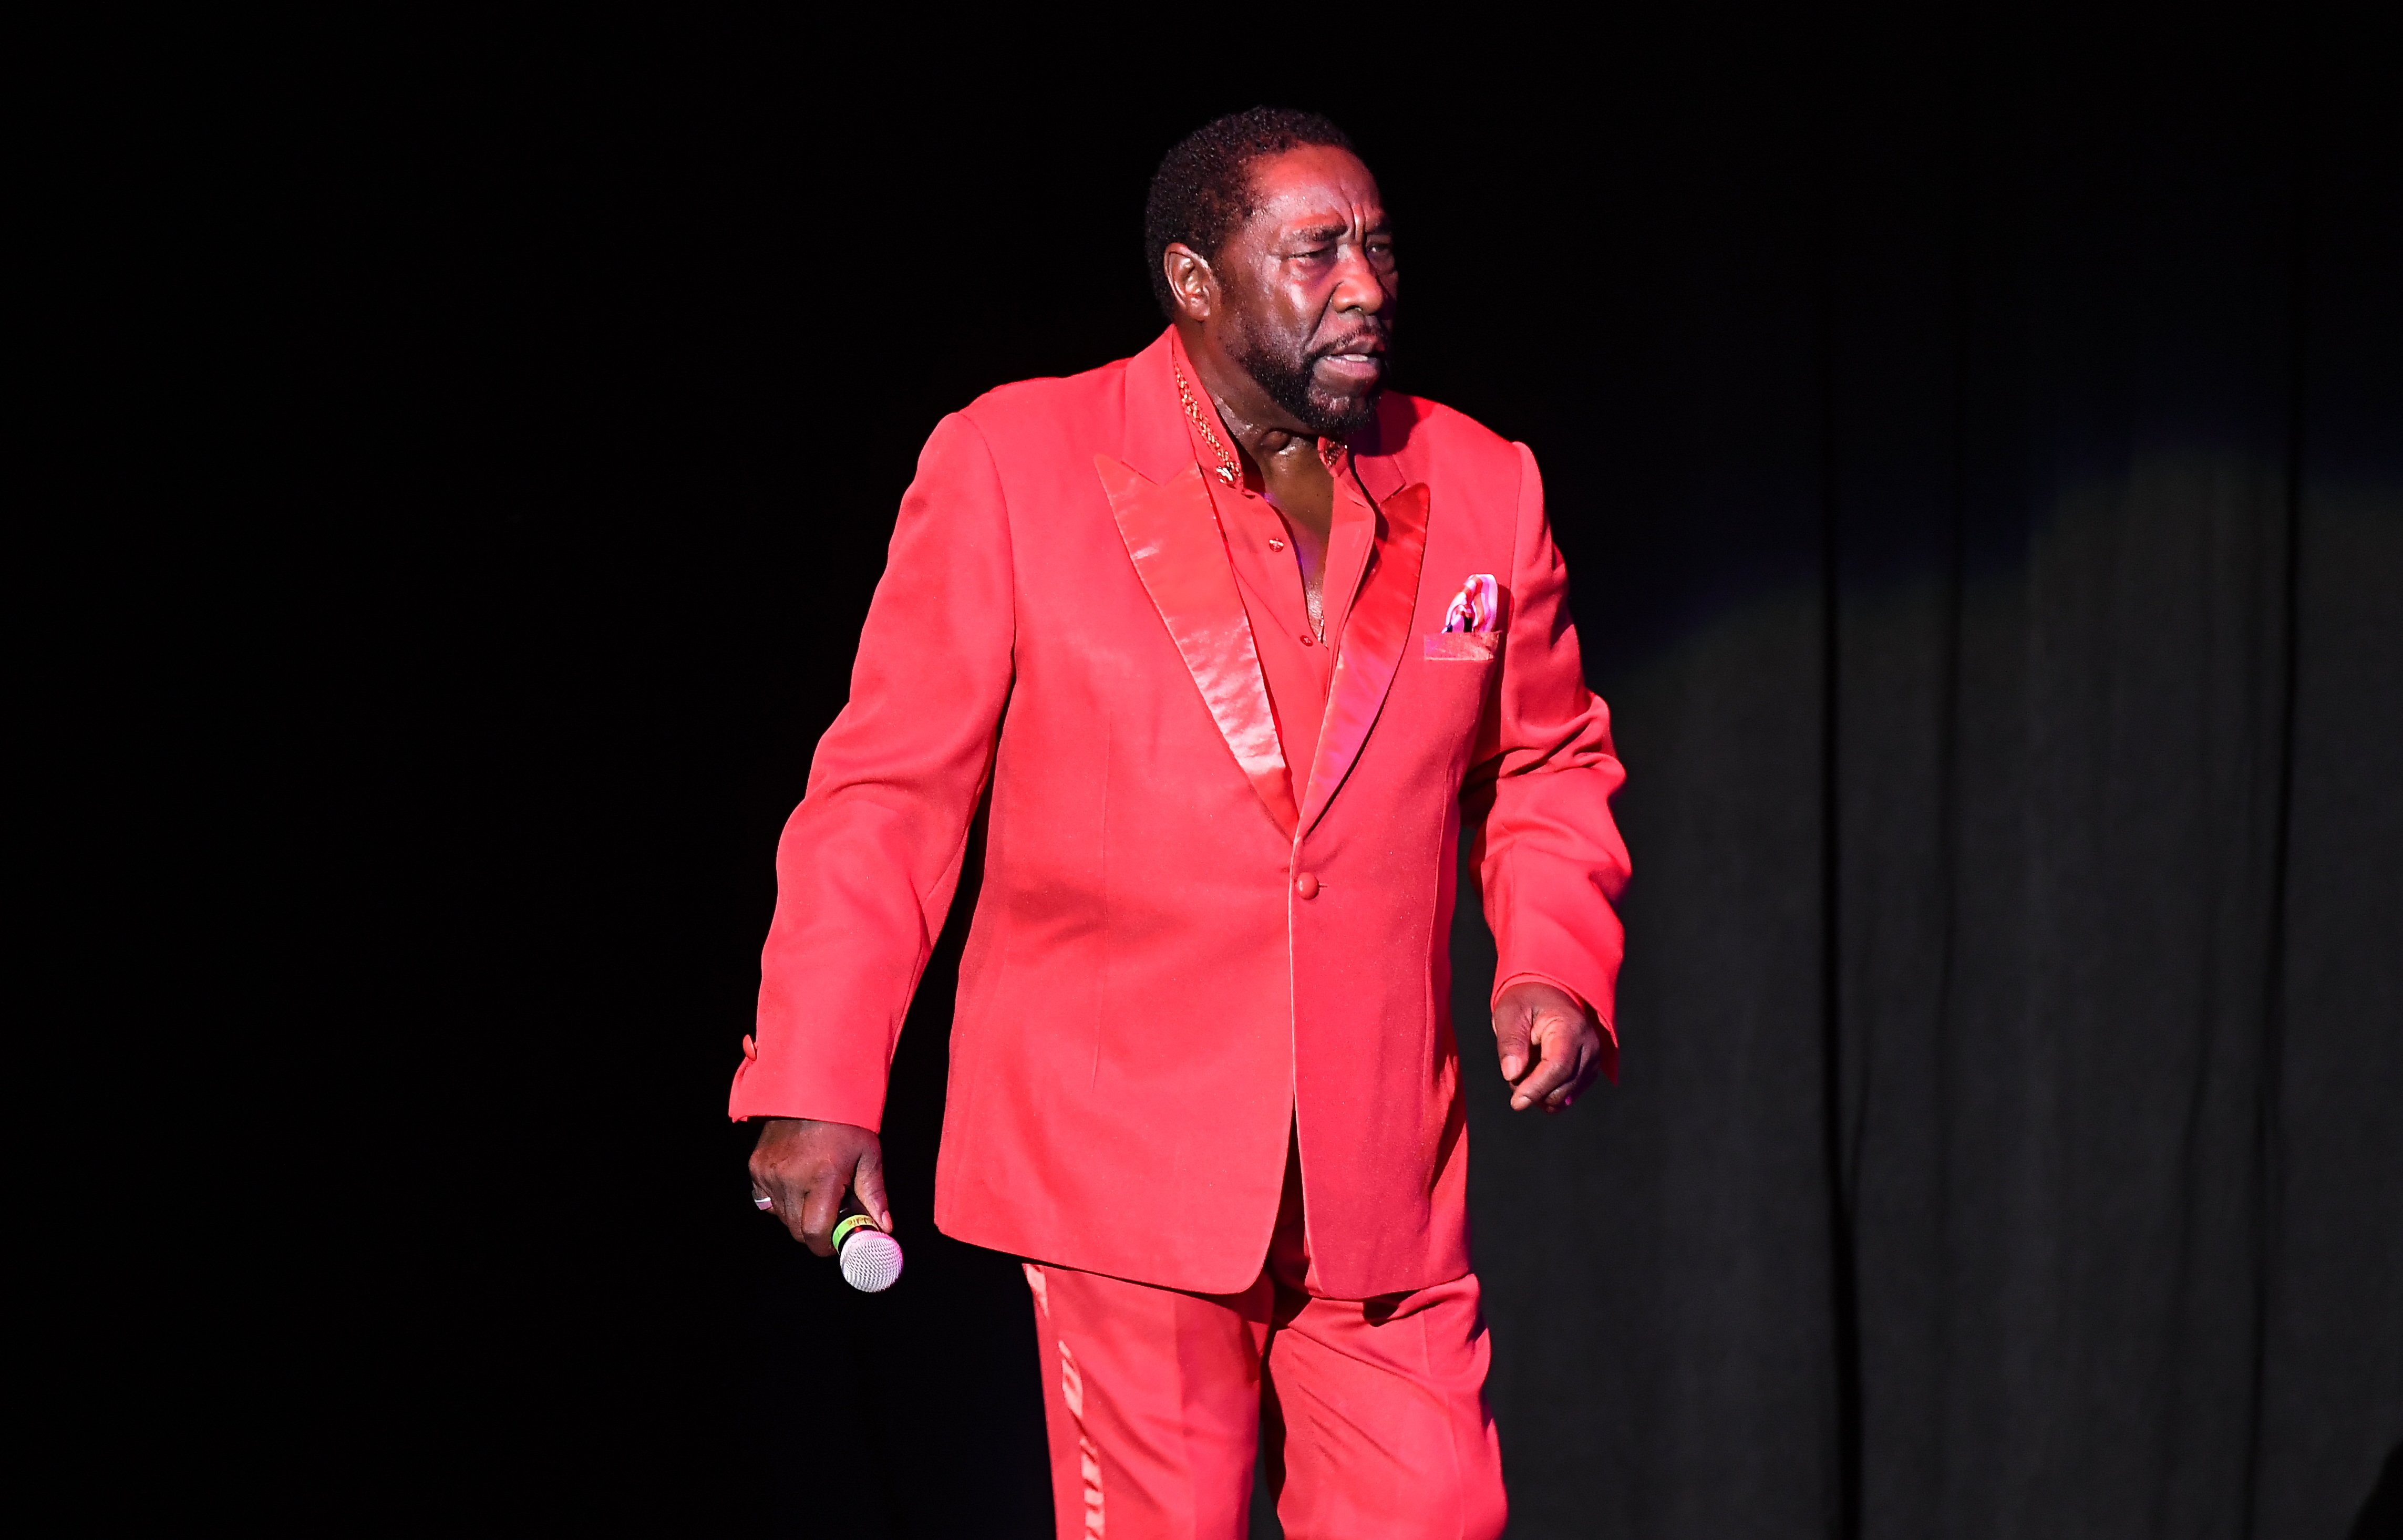 Eddie Levert of The O'Jays performs in concert at State Bank Amphitheatre at Chastain Park on August 10, 2018 in Atlanta, Georgia. | Photo: GettyImages